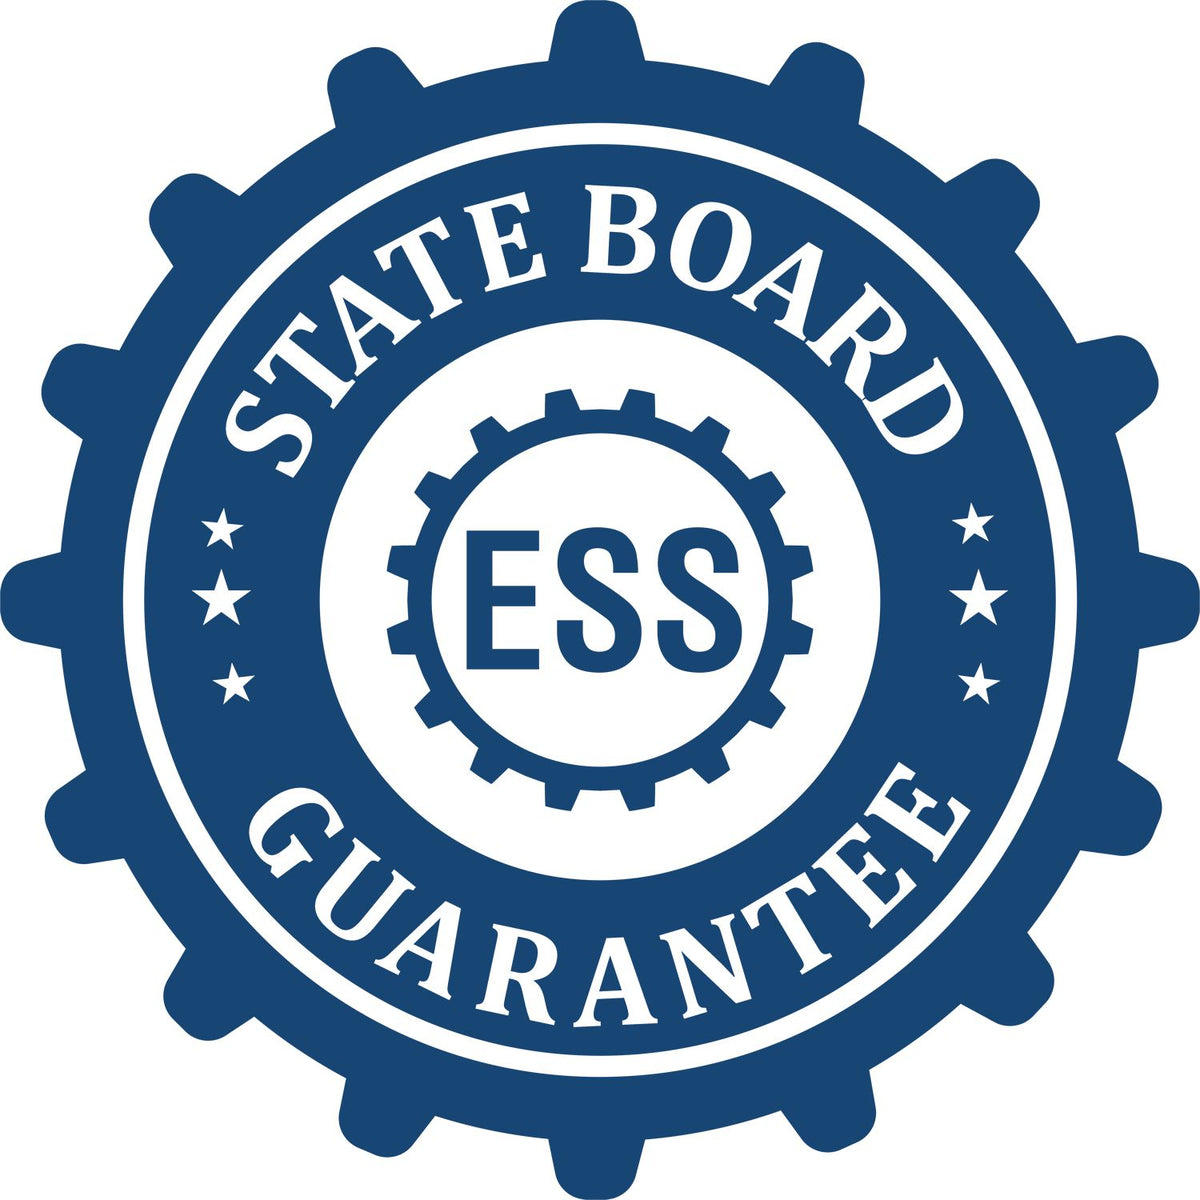 An emblem in a gear shape illustrating a state board guarantee for the Heavy Duty Cast Iron Maryland Architect Embosser product.